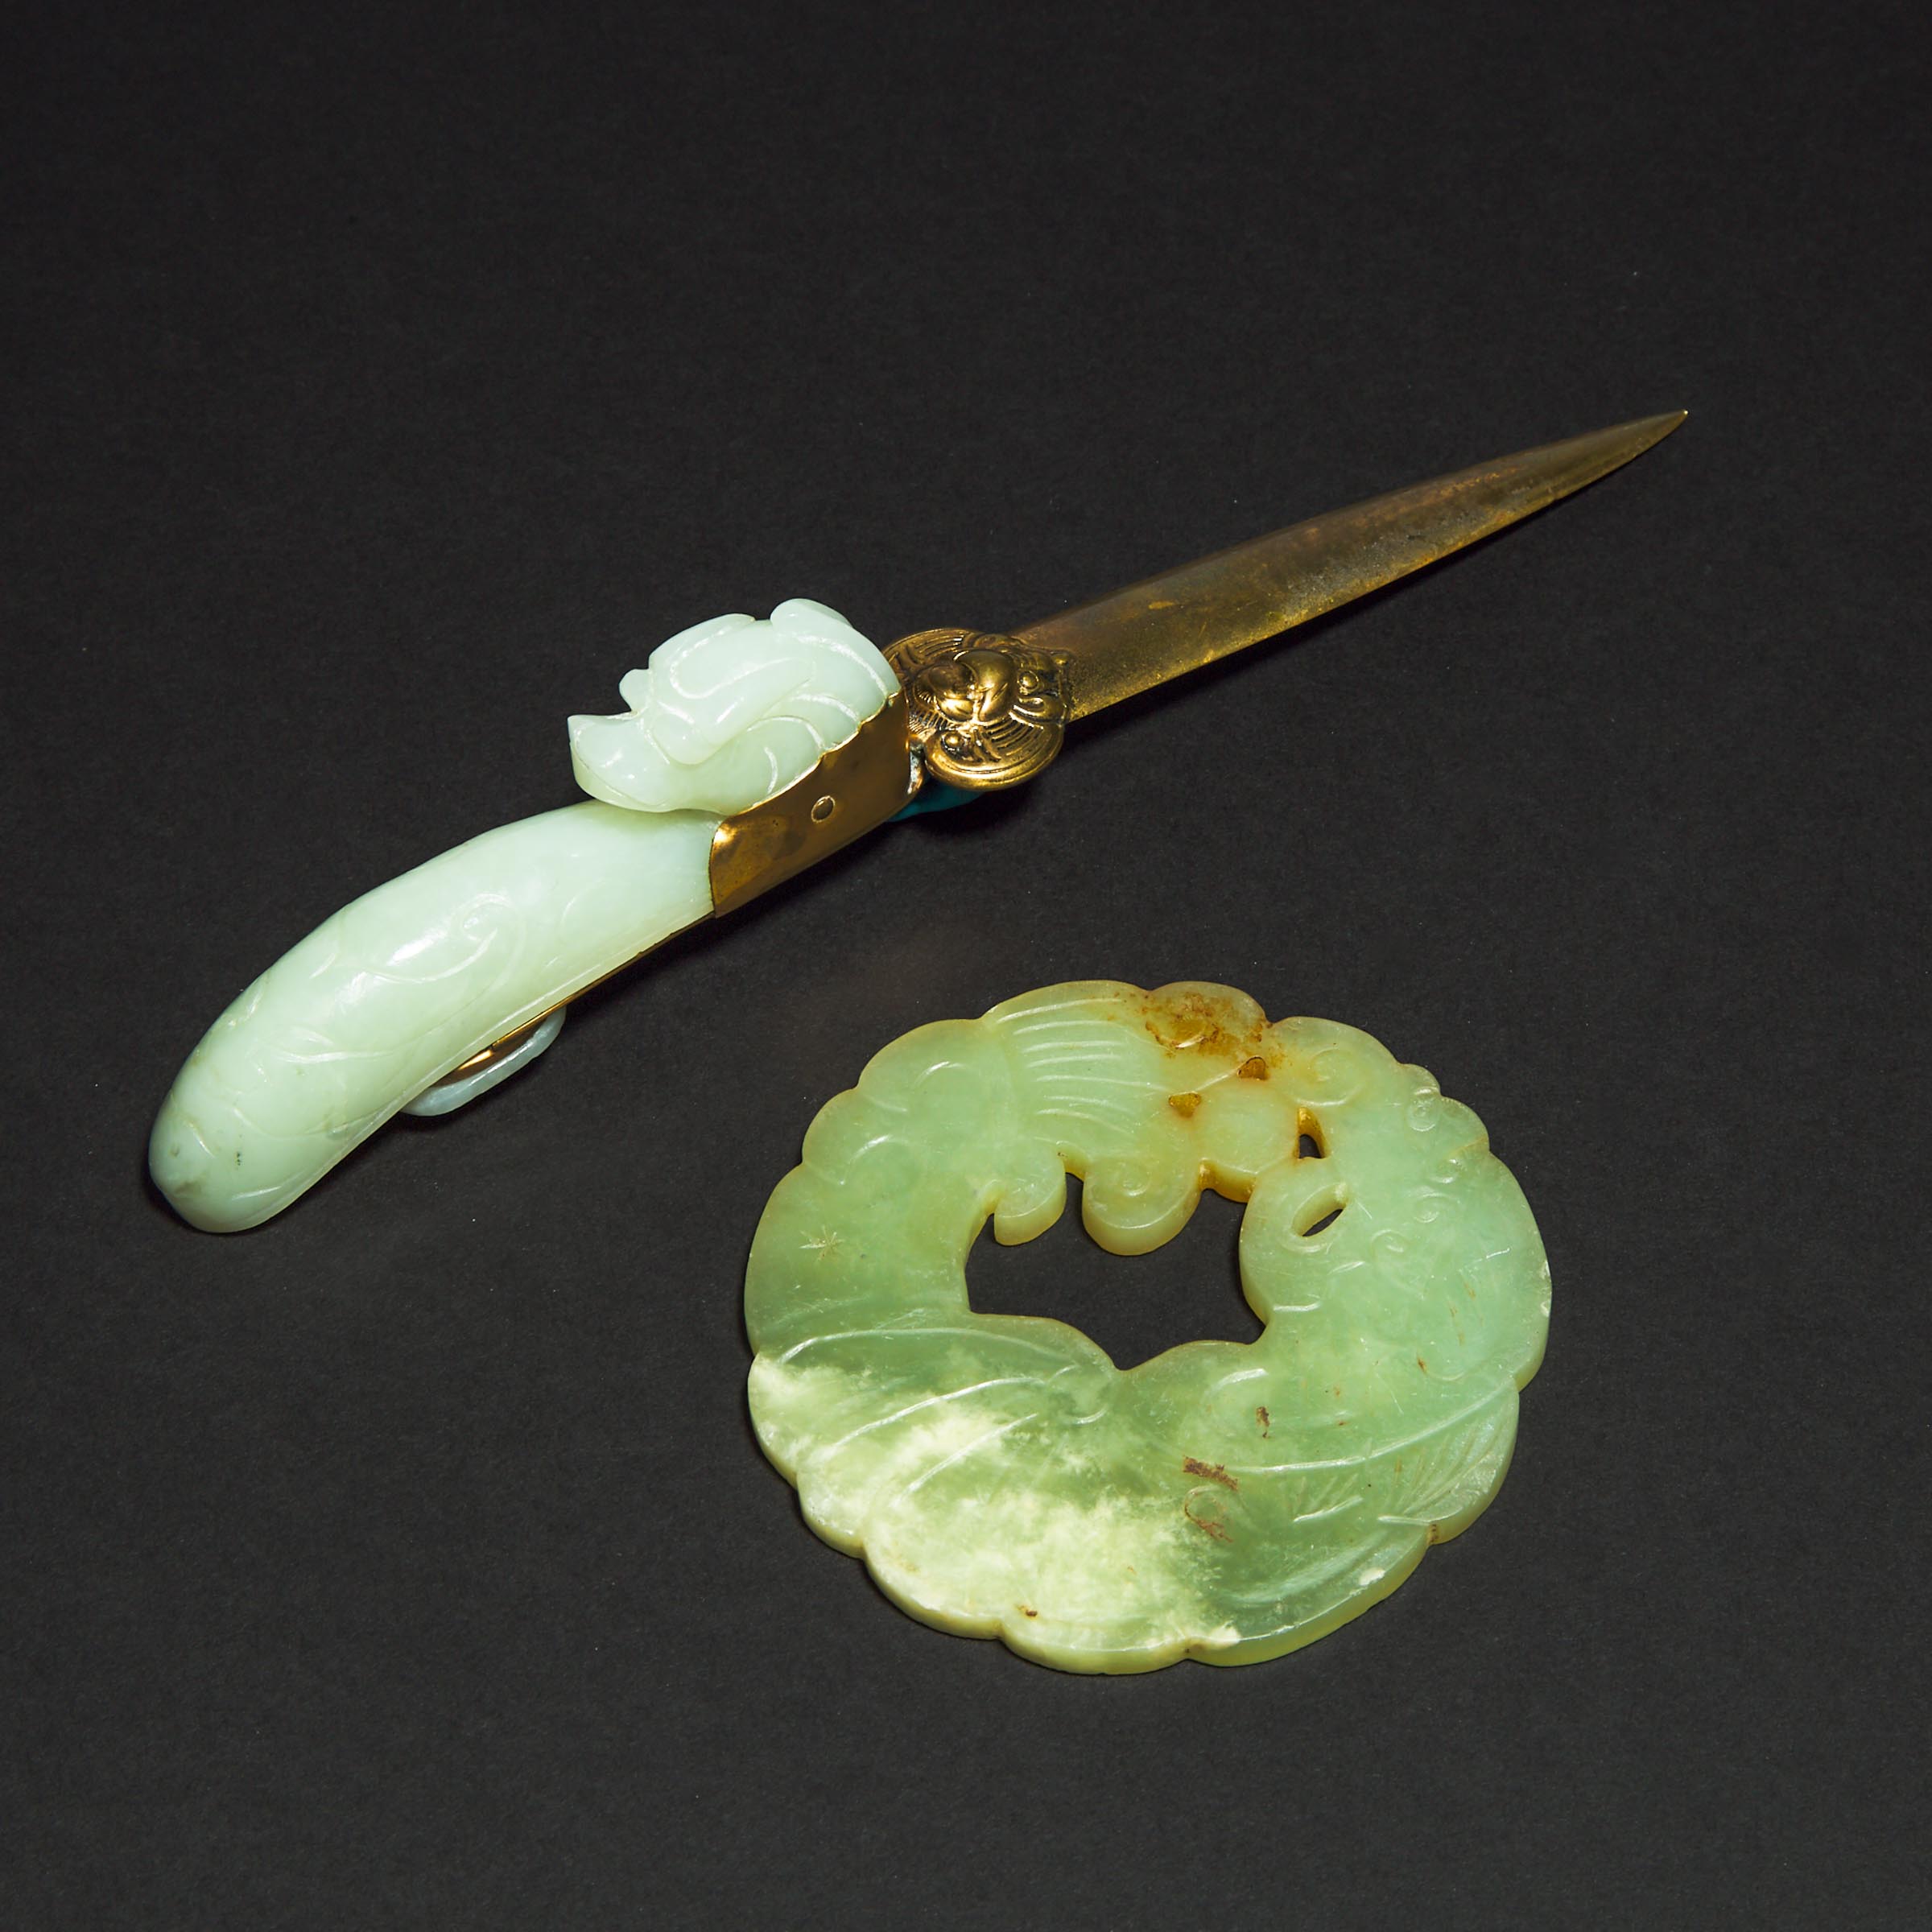 A Pale Celadon Jade Mounted Letter Opener, together with a Stylized Celadon Jade Bi Disc